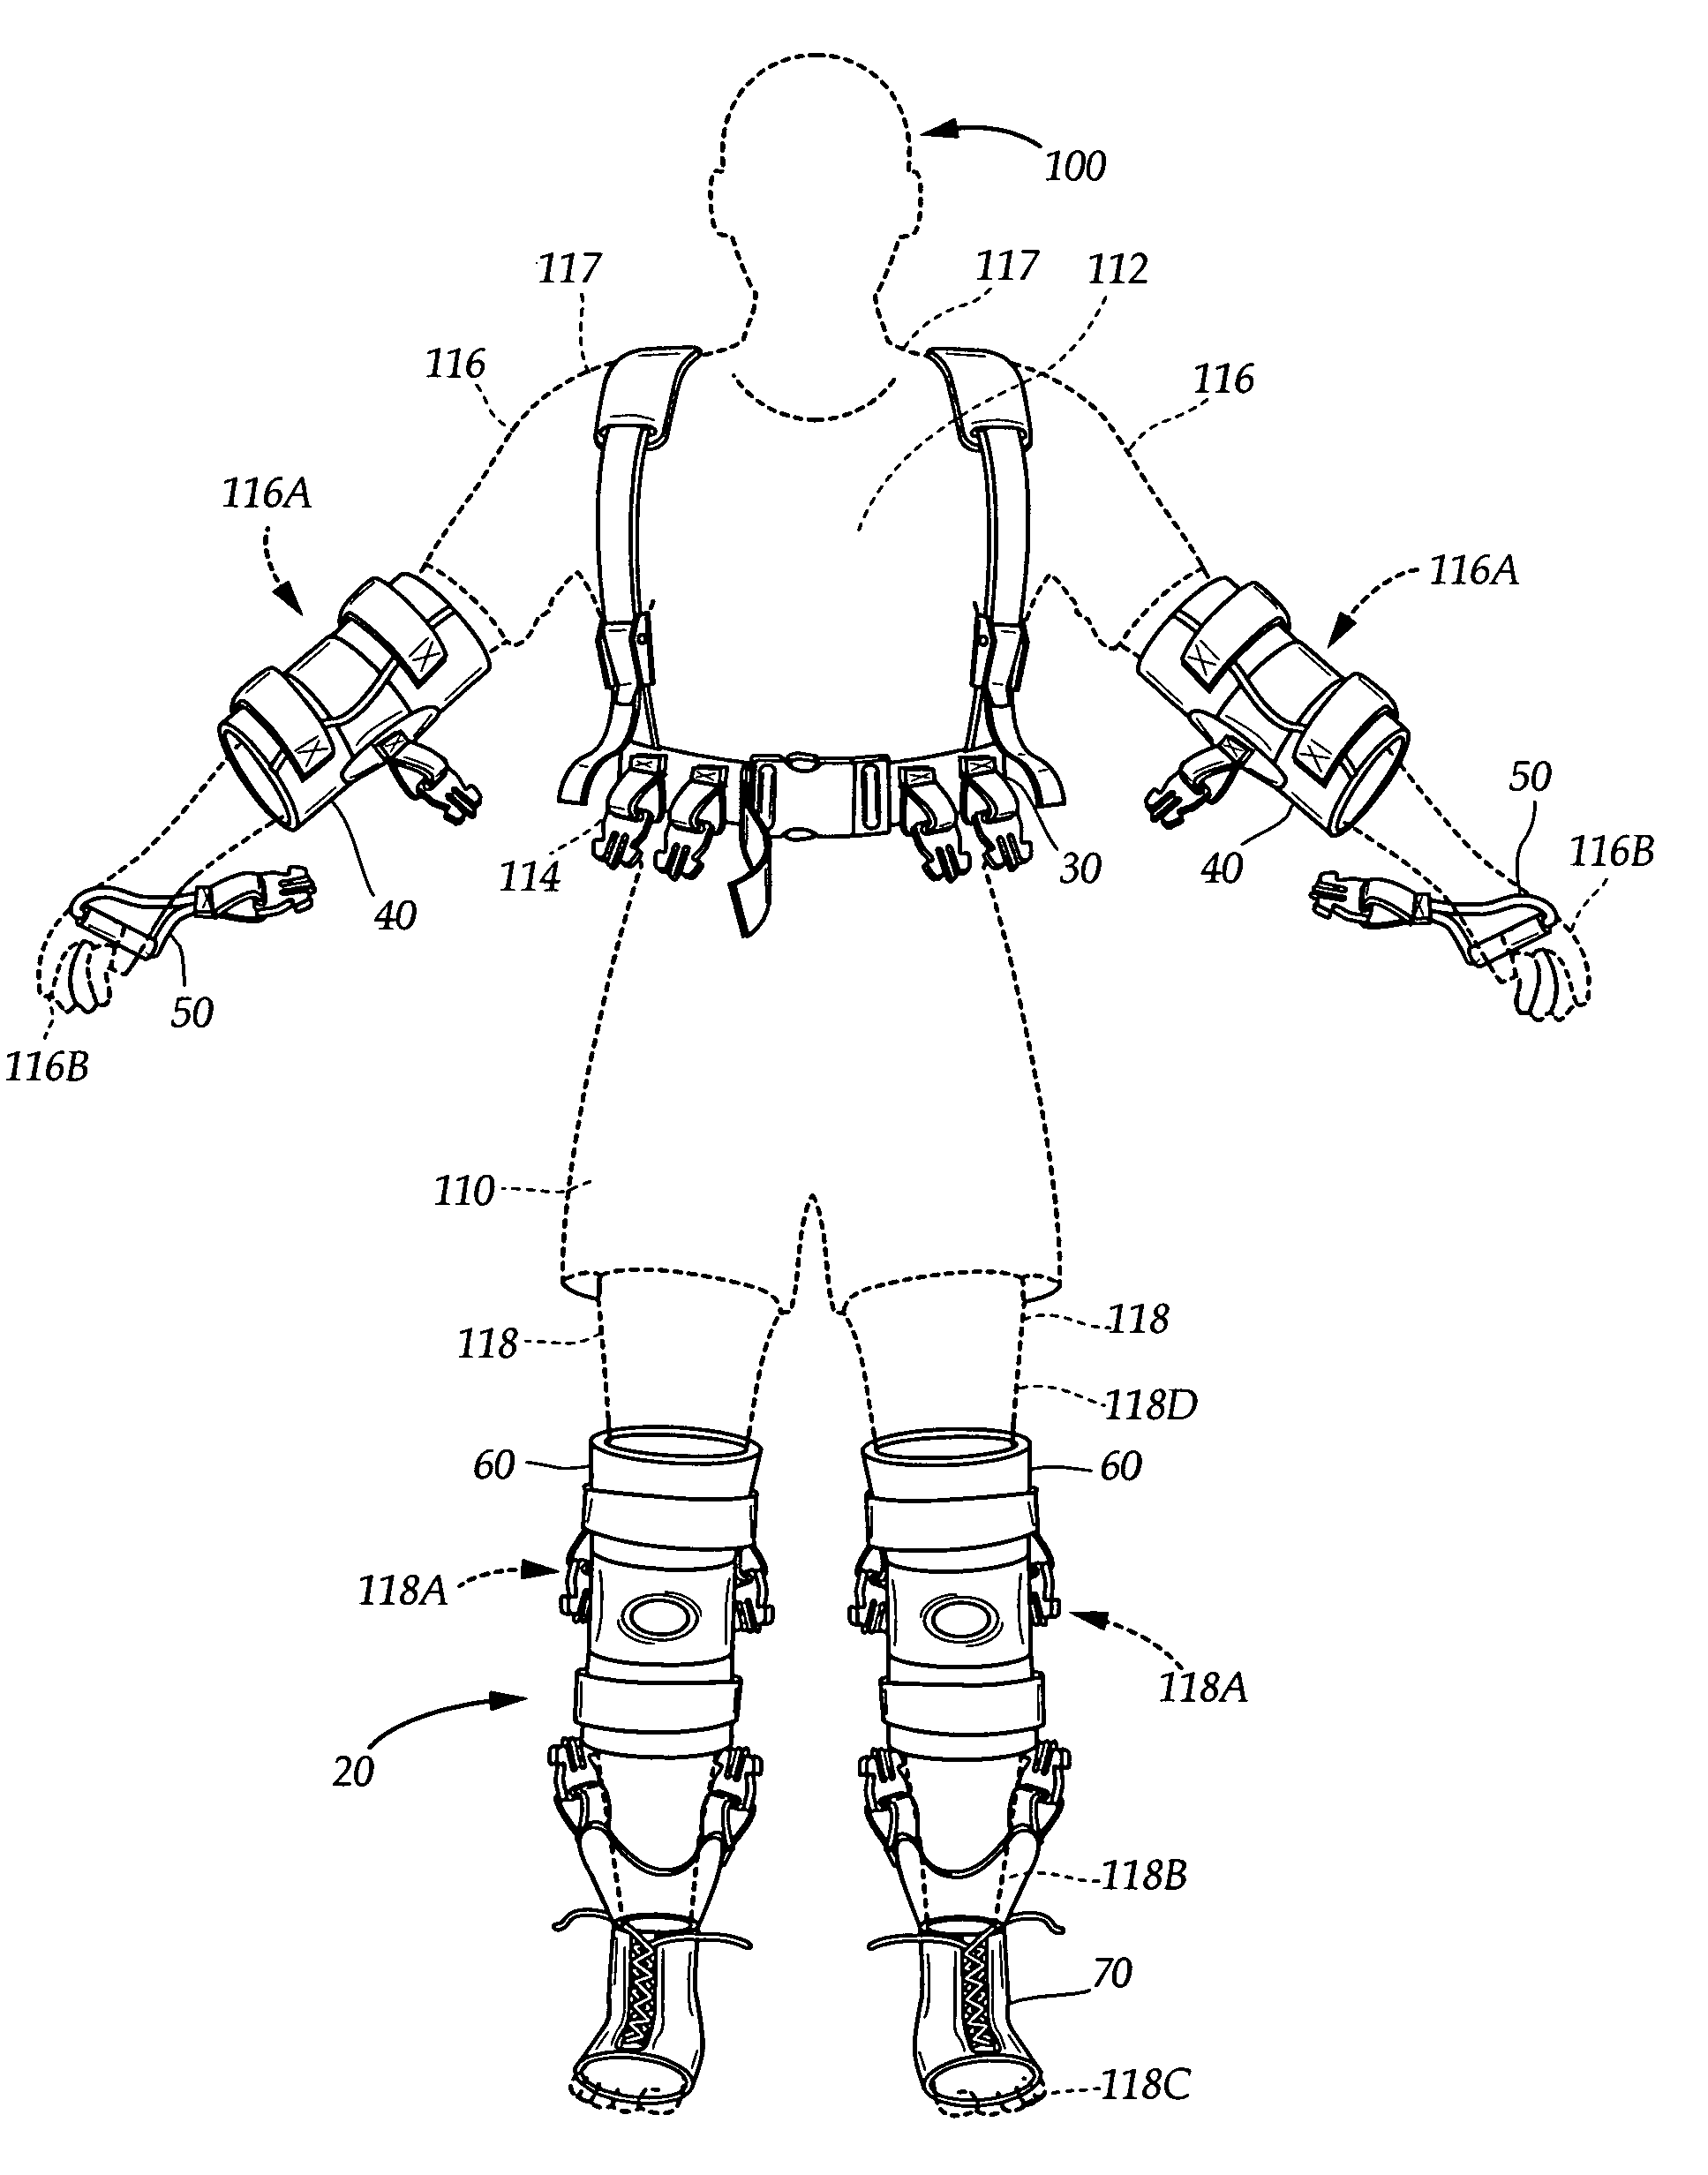 Device for strengthening, training, and rehabilitating isolated muscle groups using elastic resistance elements